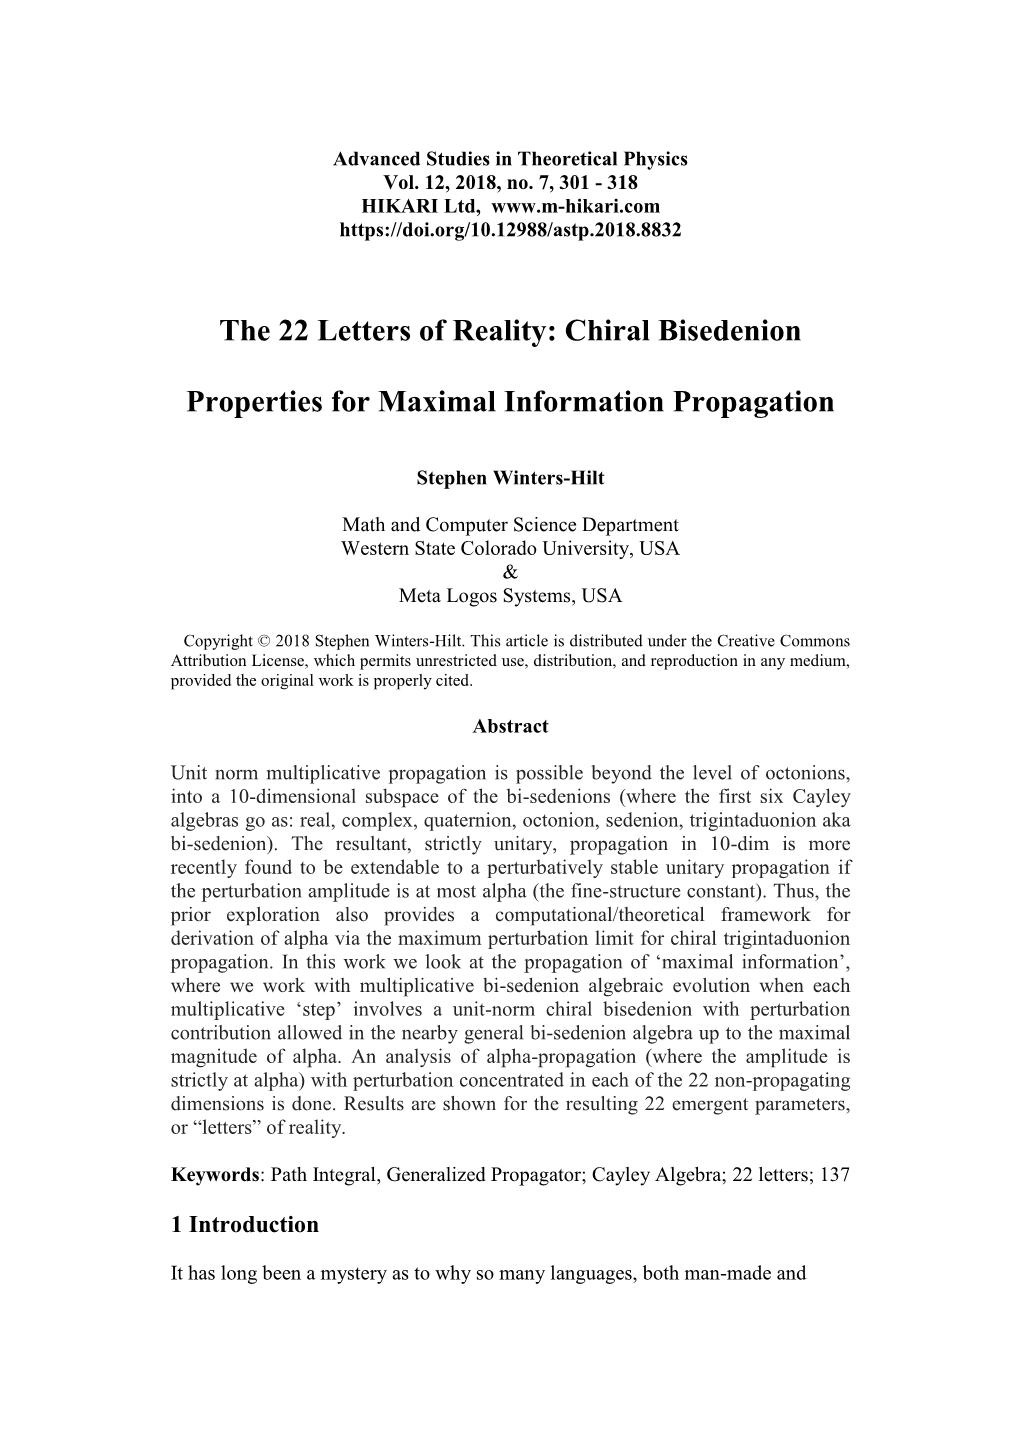 The 22 Letters of Reality: Chiral Bisedenion Properties for Maximal Information Propagation